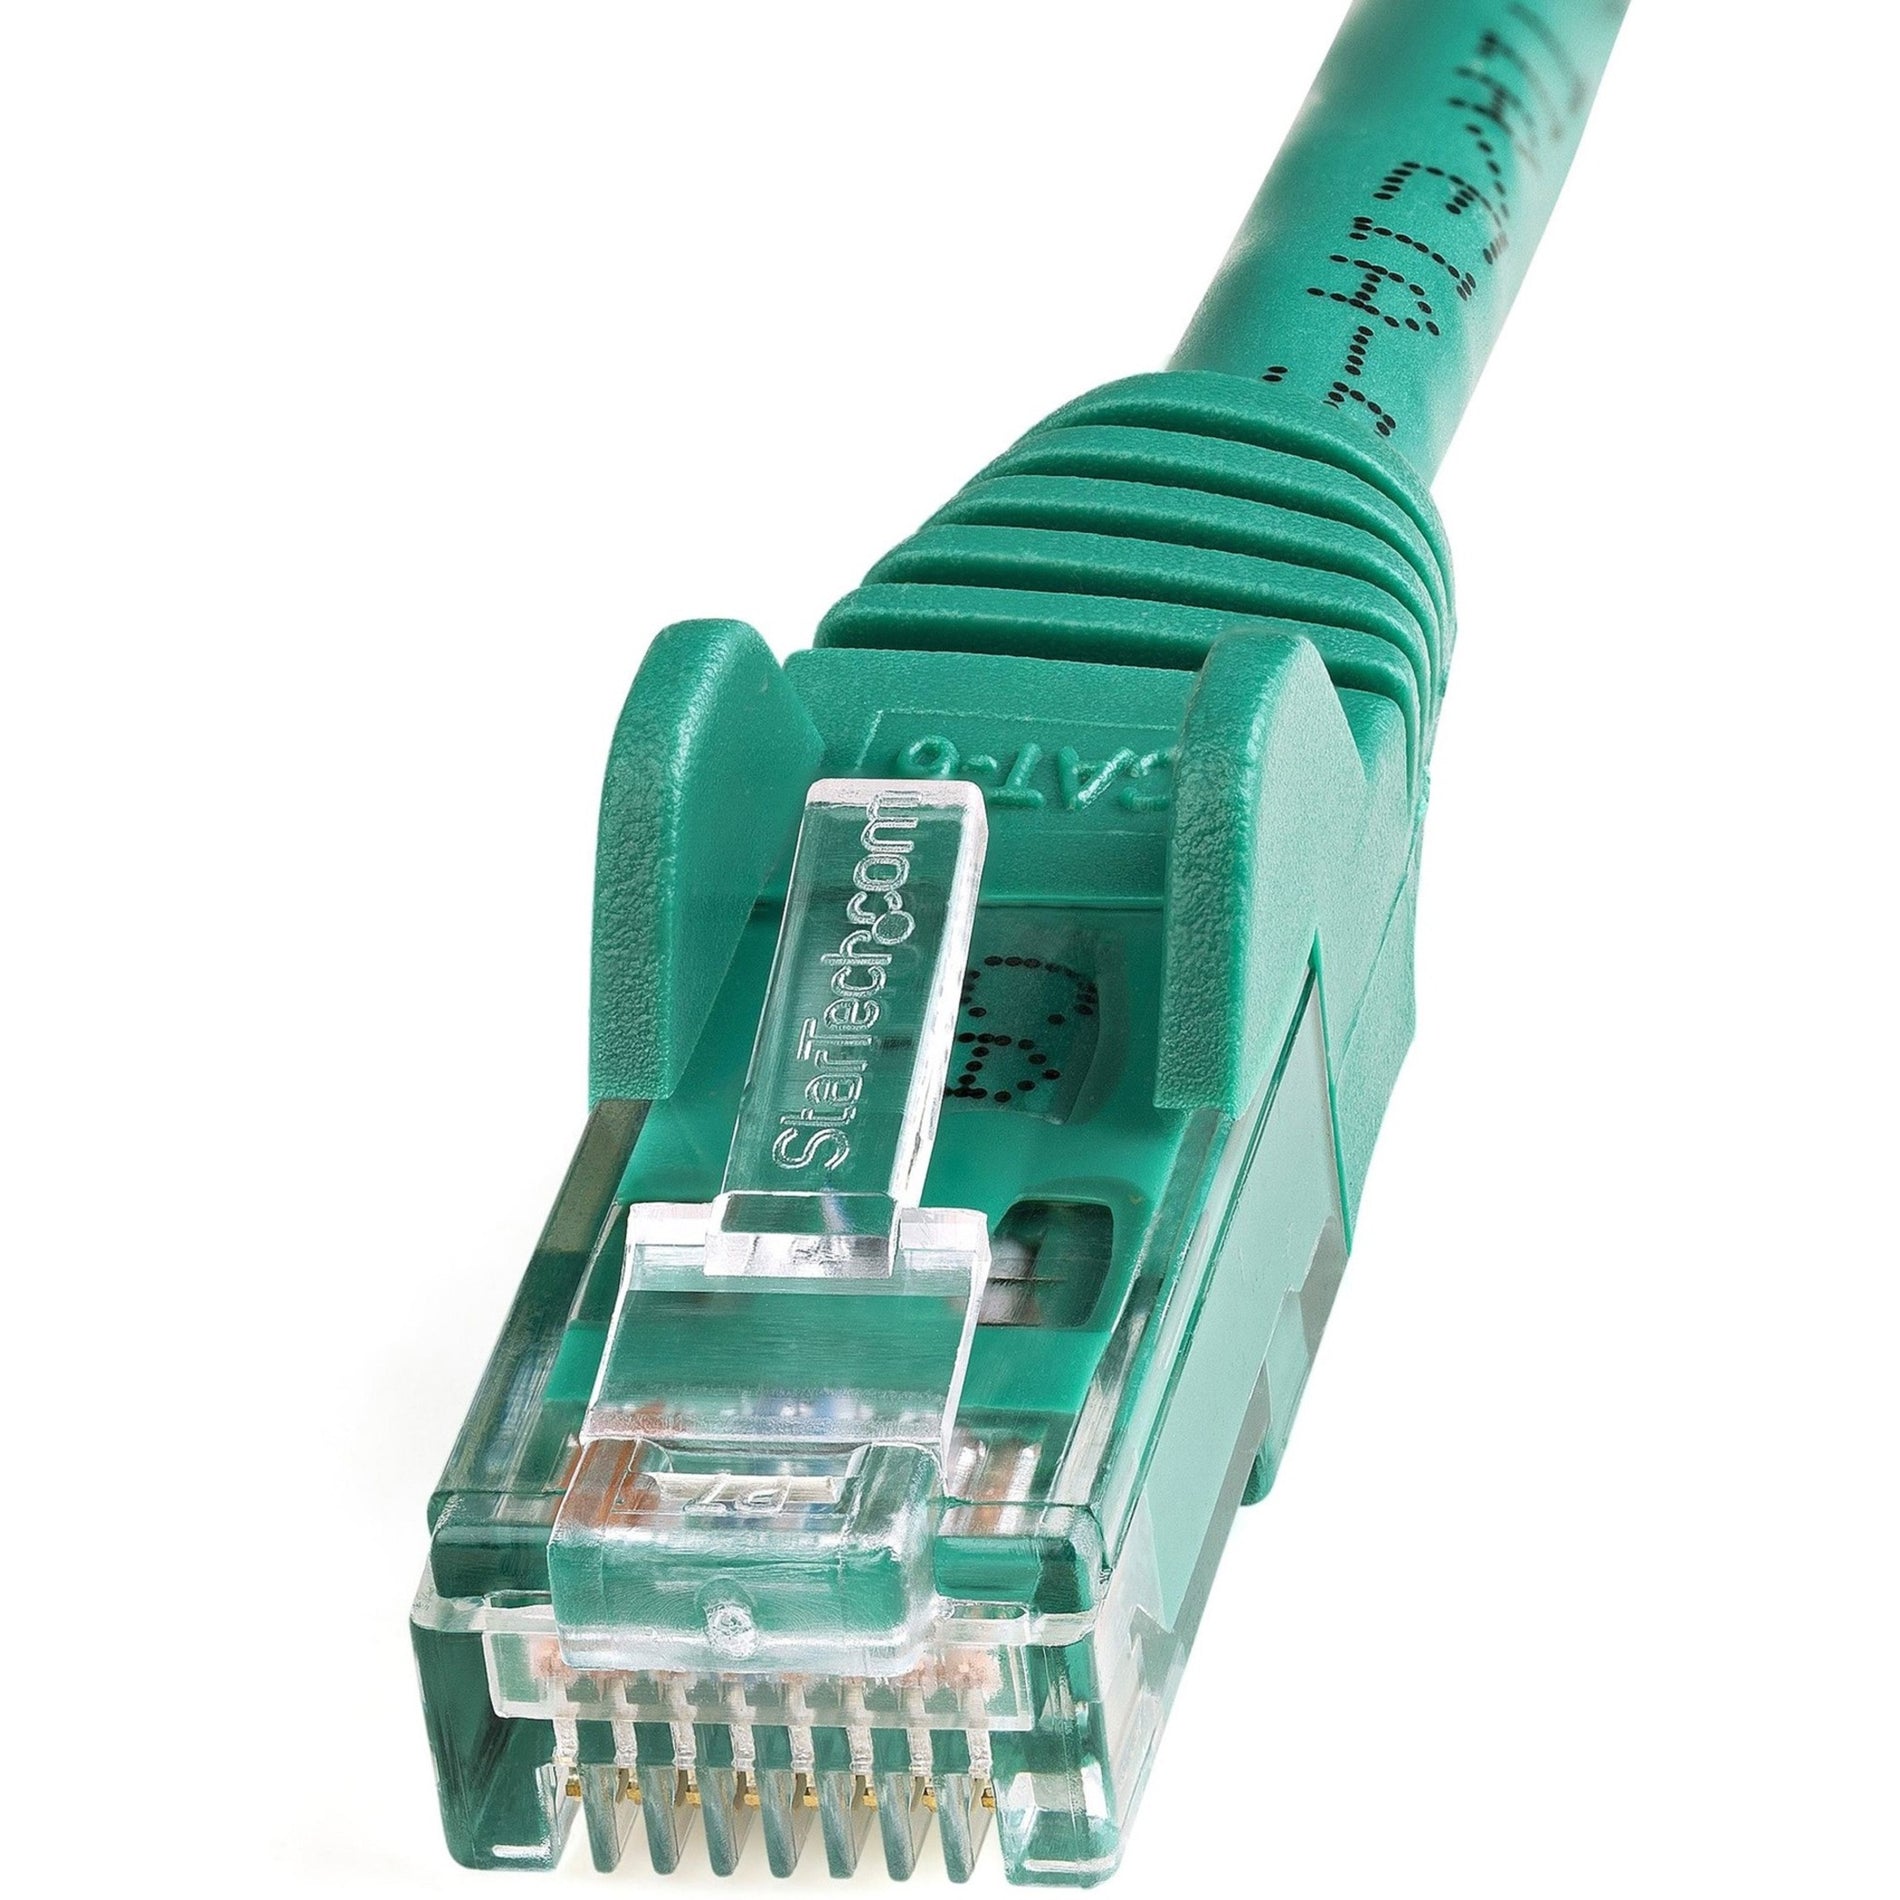 StarTech.com N6PATCH25GN 25 ft Green Snagless Cat6 UTP Patch Cable, 10 Gbit/s Data Transfer Rate, Lifetime Warranty